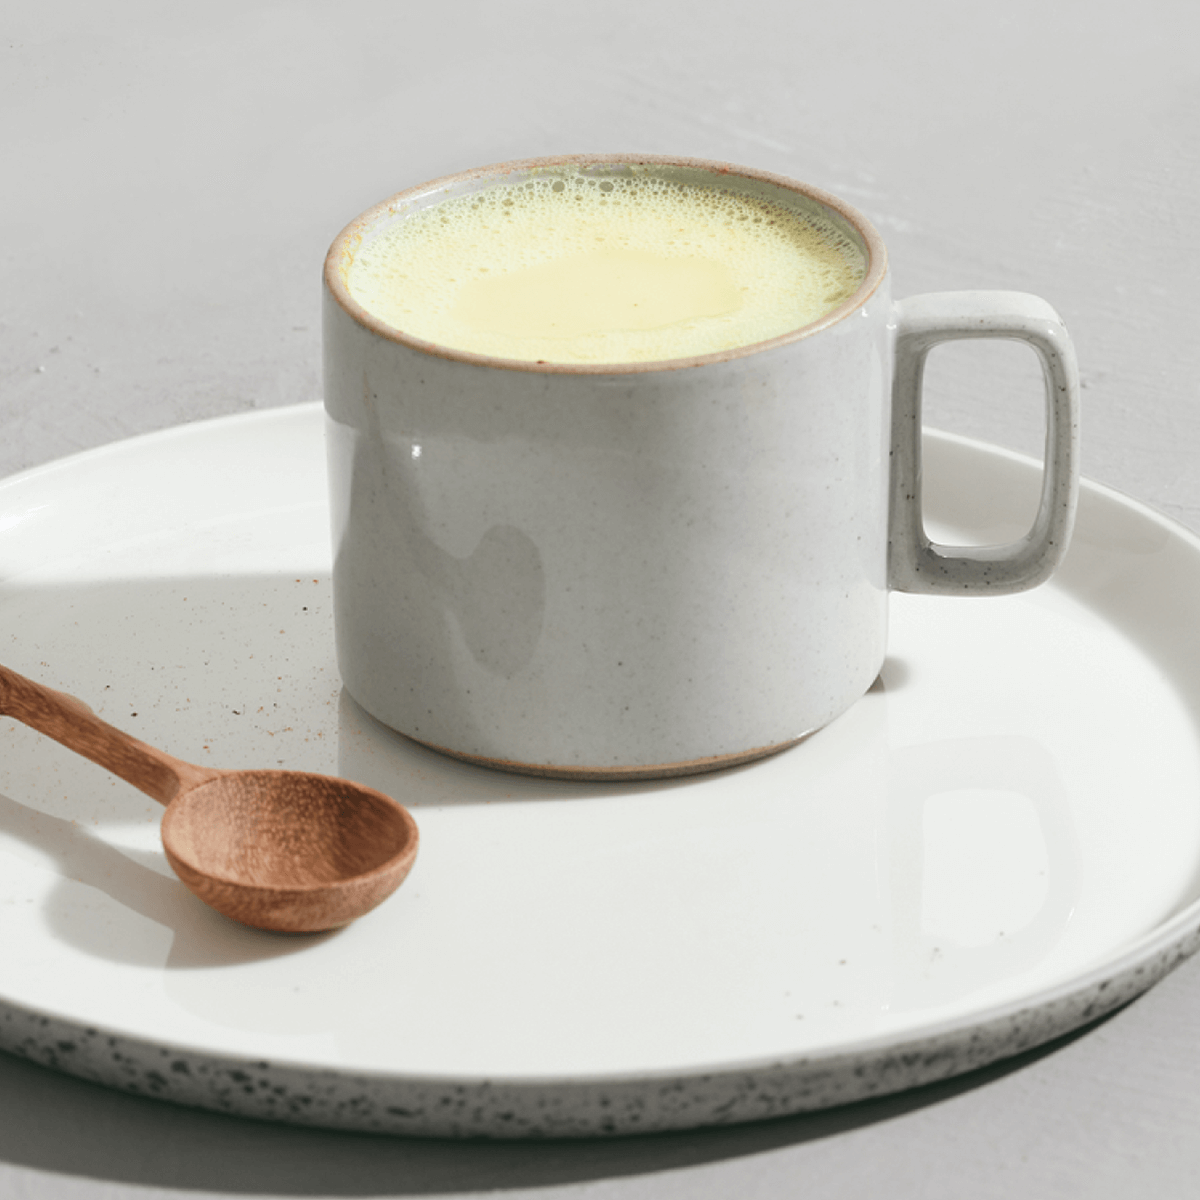 Frothy hot drink in a mug with a spoon alongside.